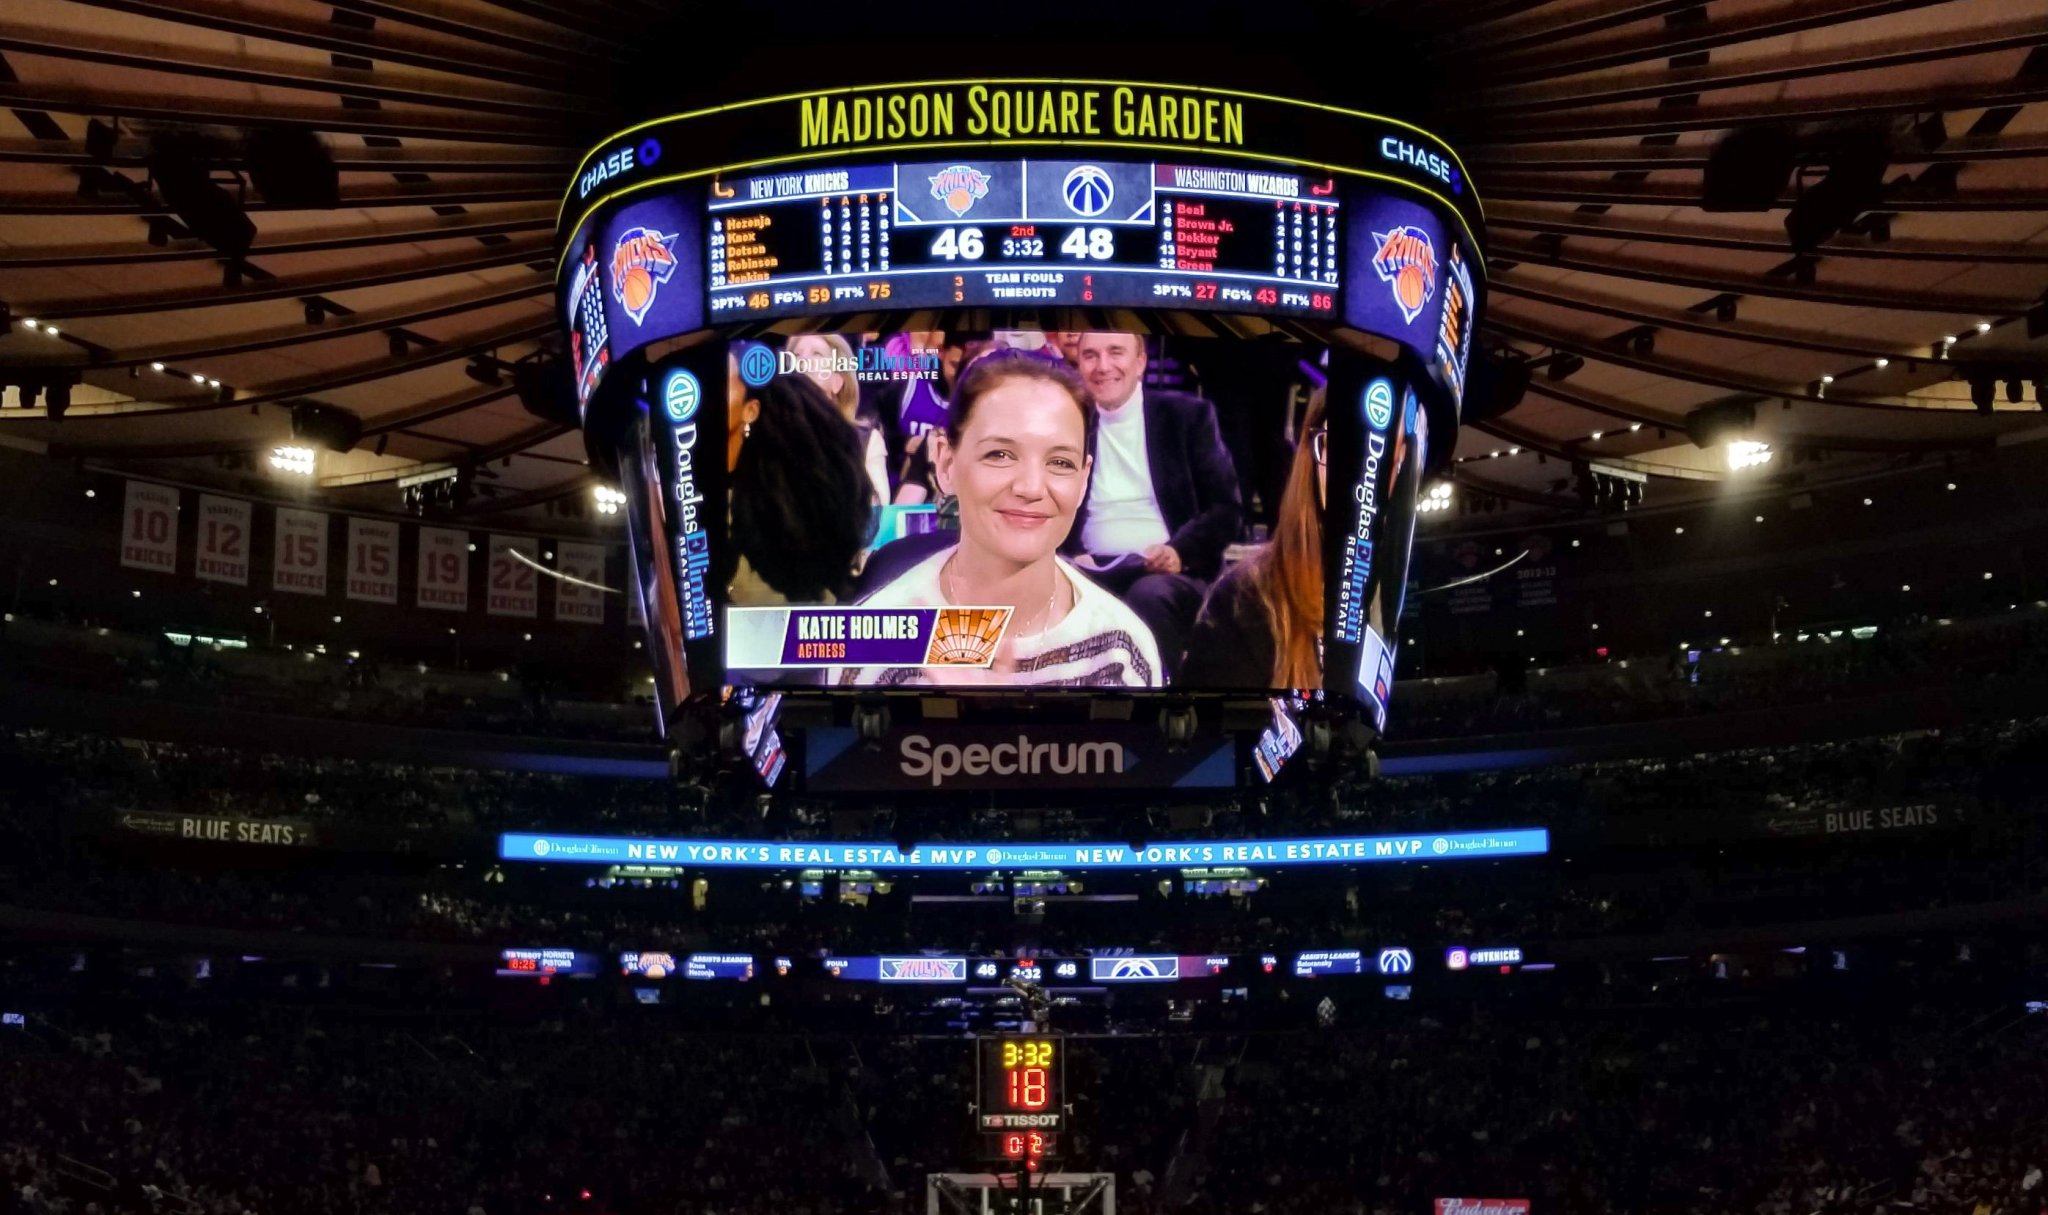 The Most Disturbing Kiss Cam Moment In History Occurred At The Knicks Game, Viewer Discretion Is Advised - BroBible